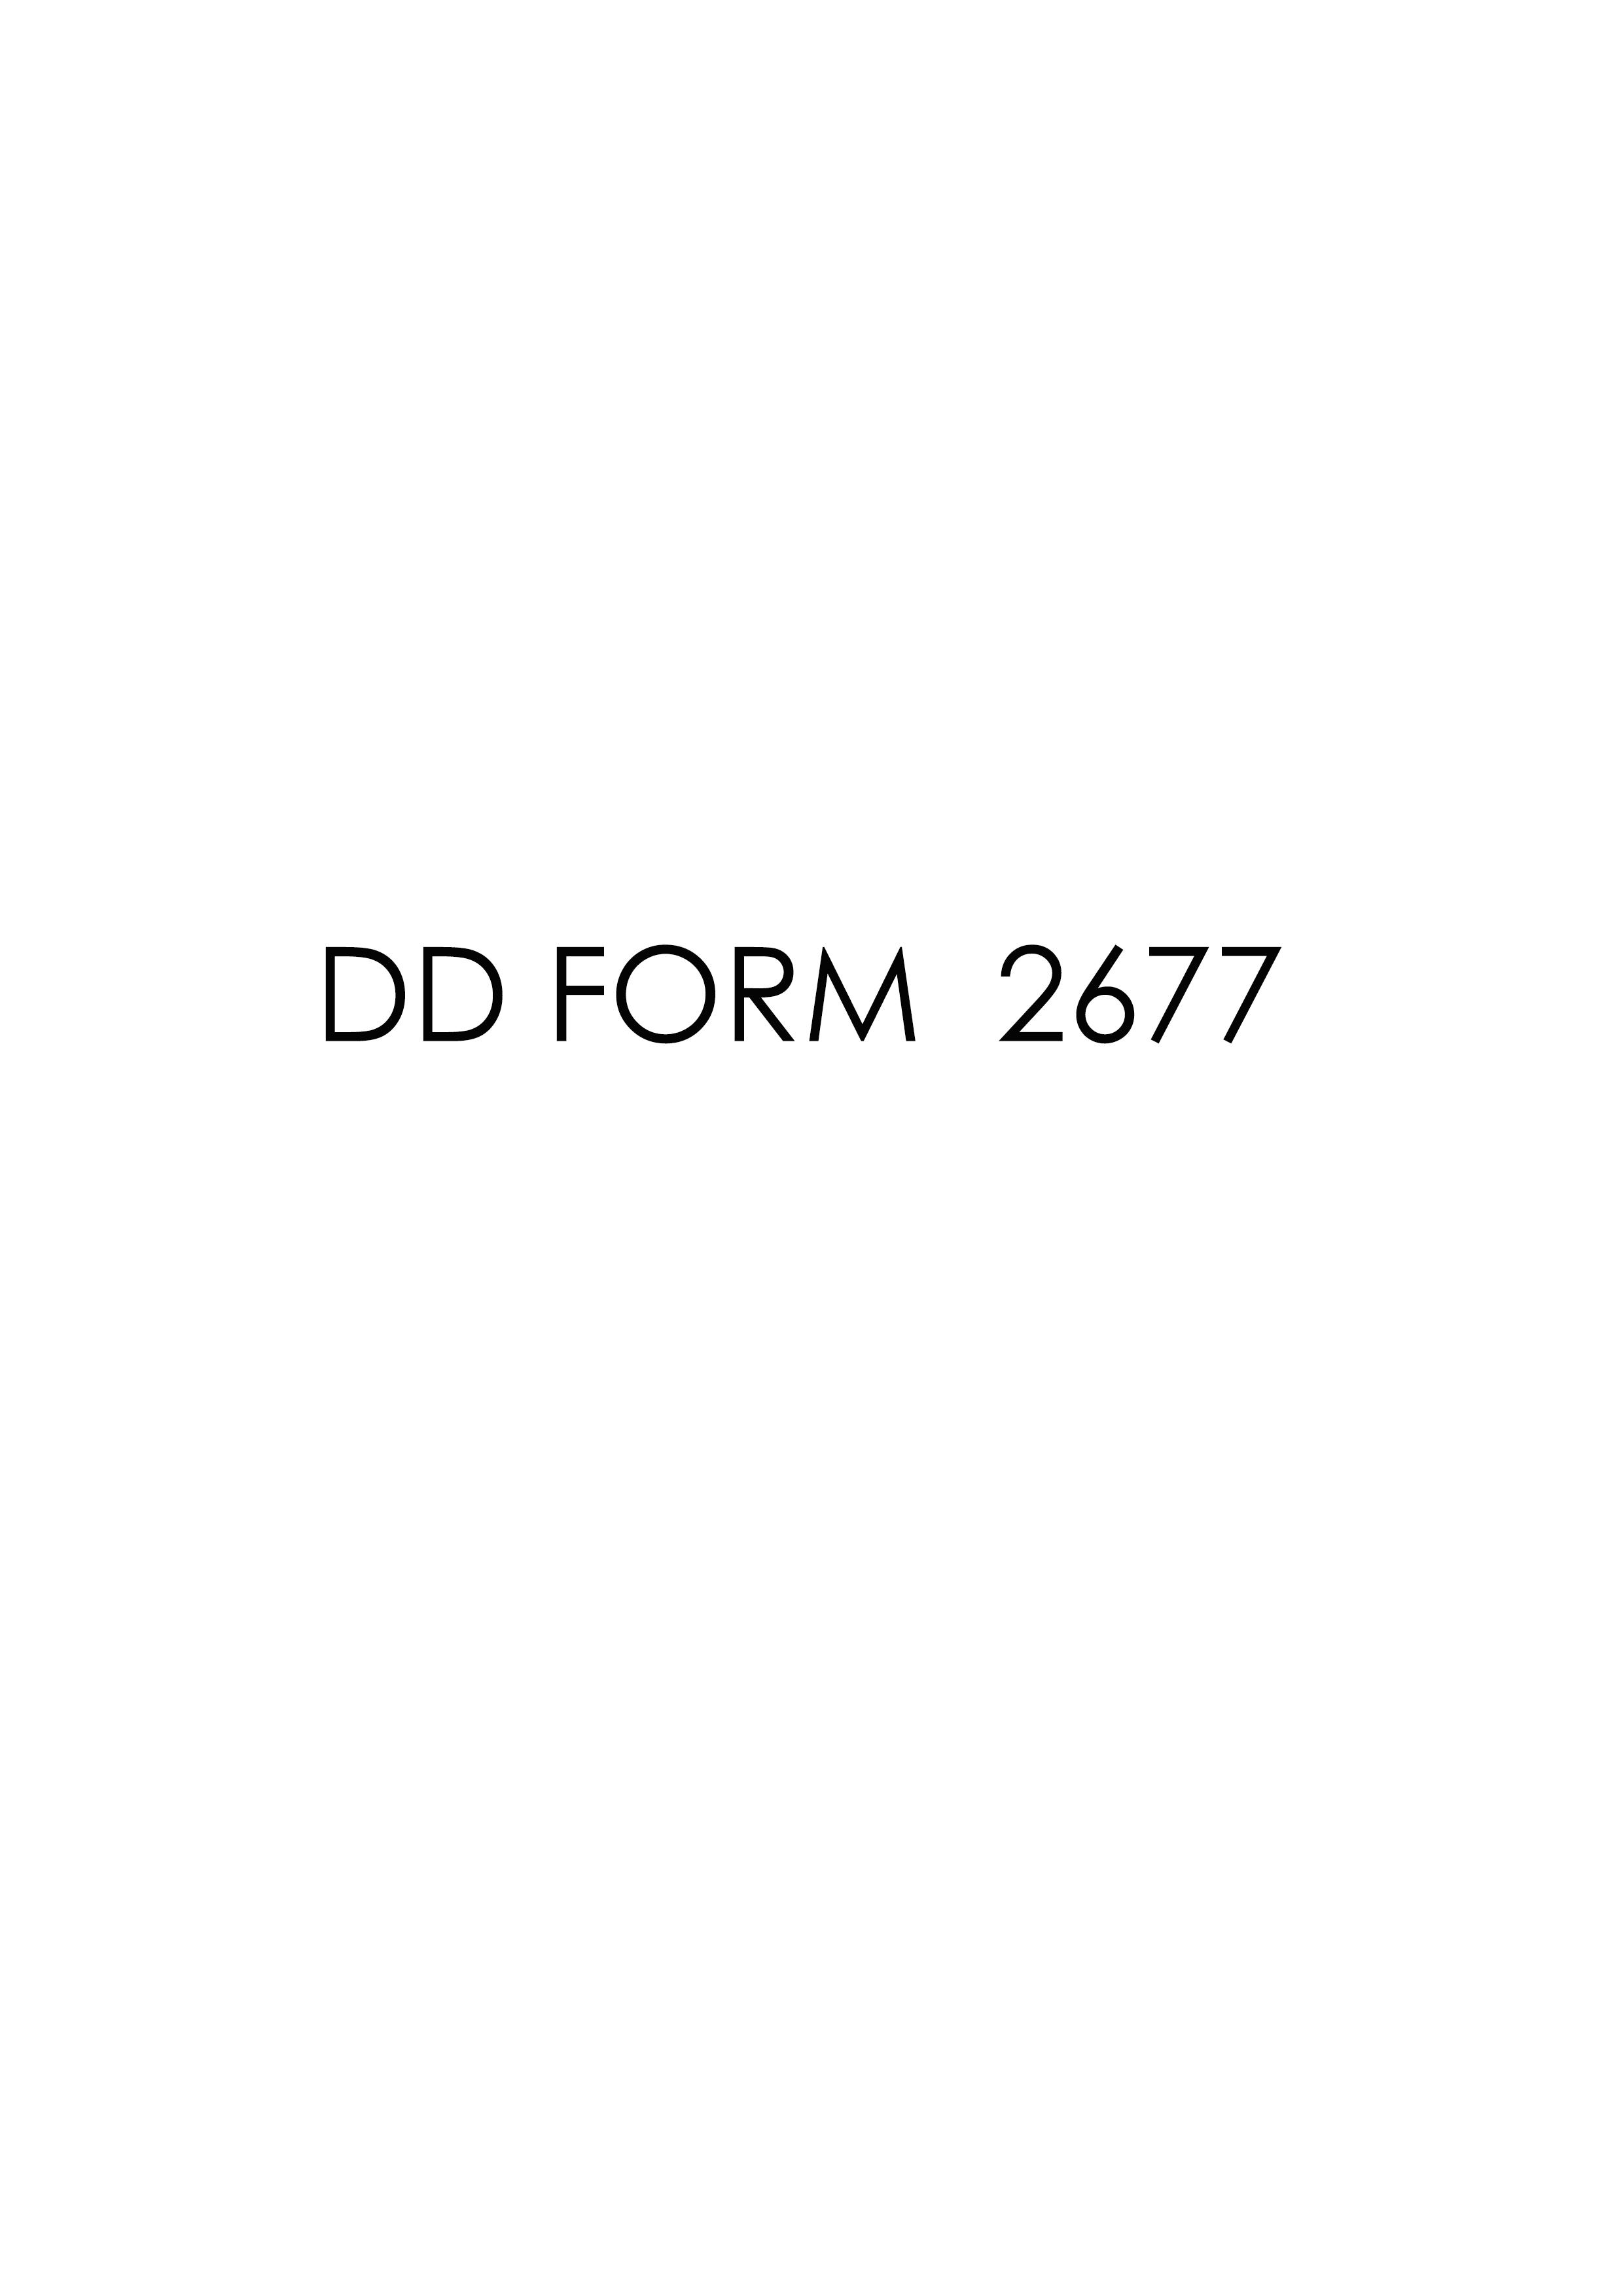 Download Fillable dd Form 2677